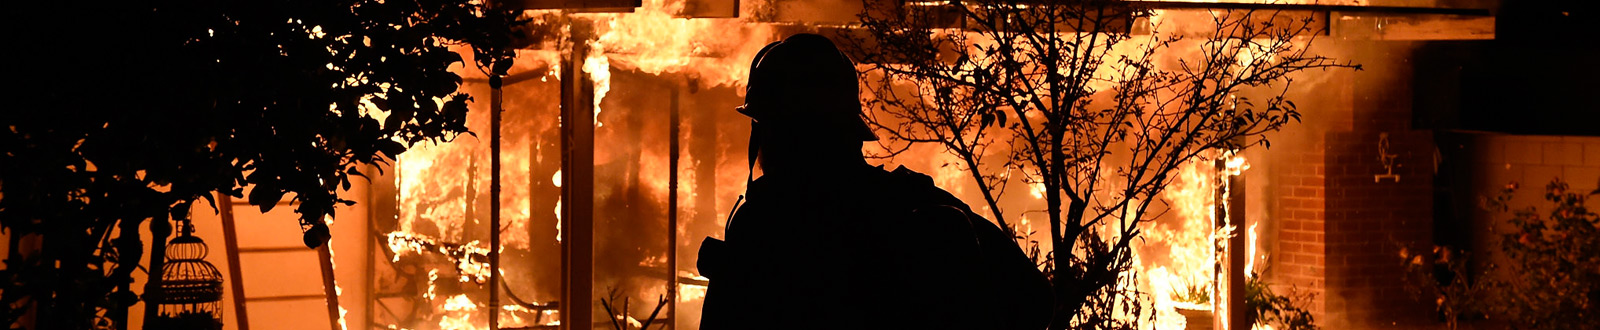 A firefighter silhouetted by a burning house 